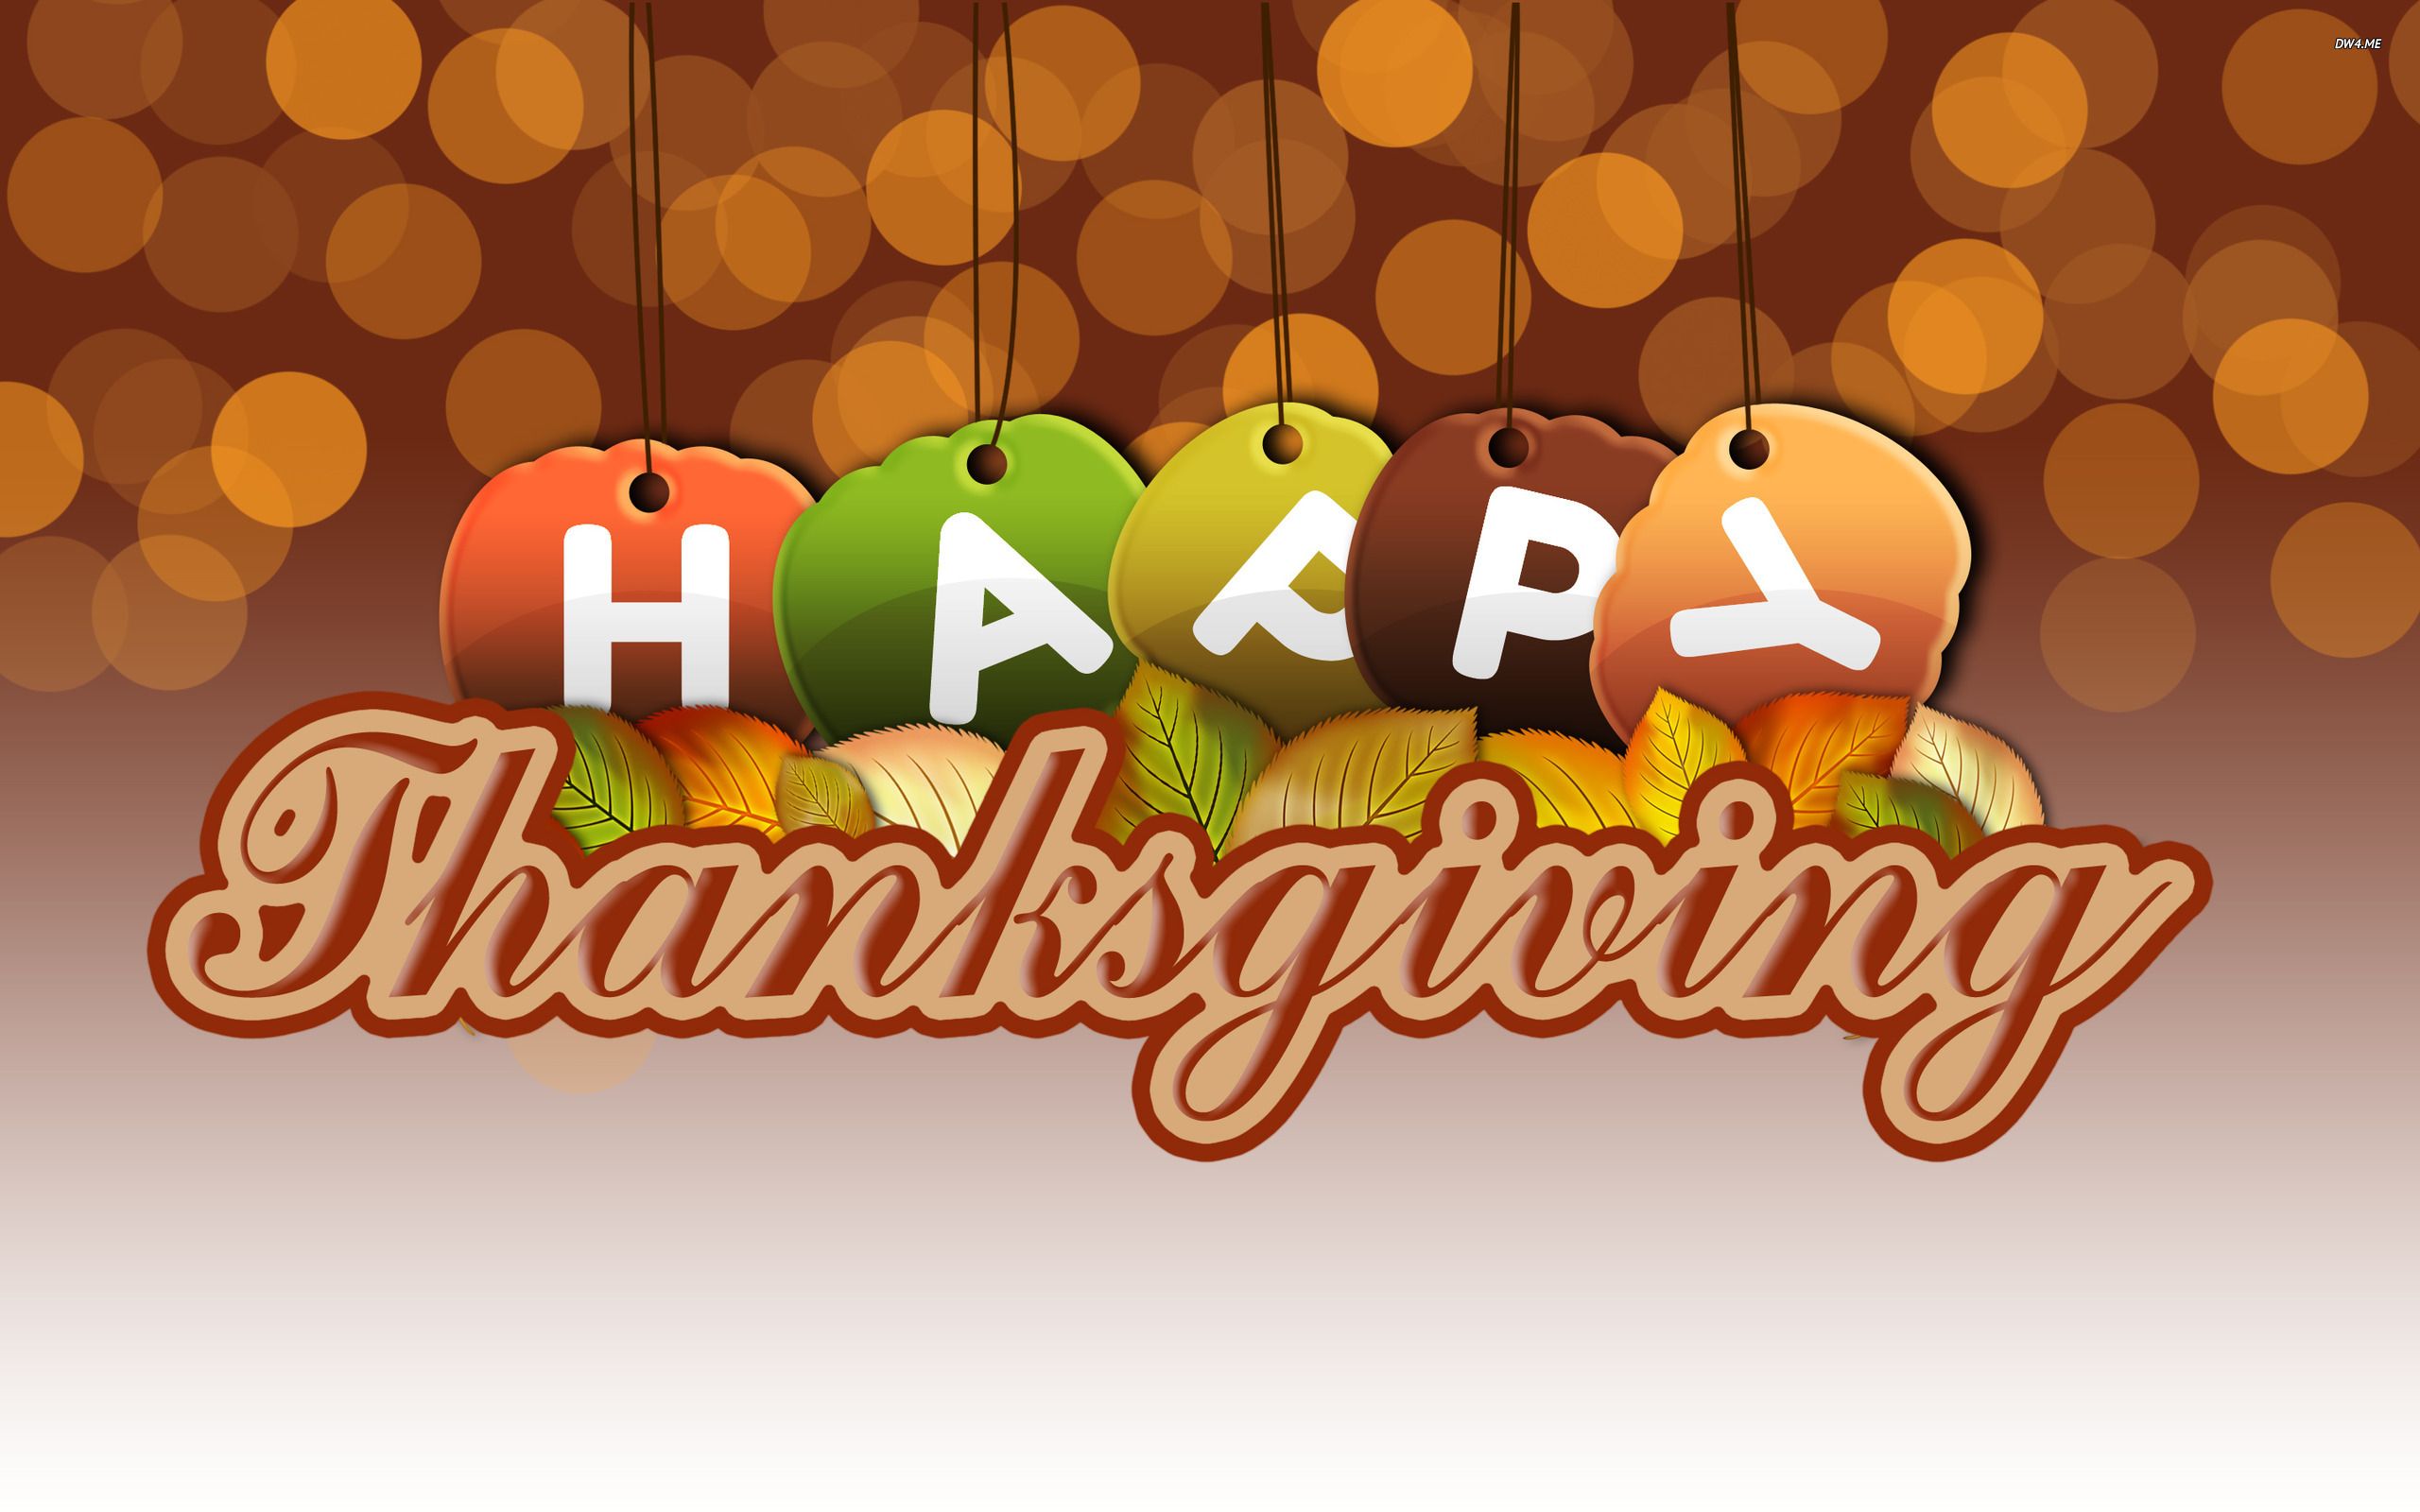 Happy Thanksgiving wallpaper - Holiday wallpapers - #1839